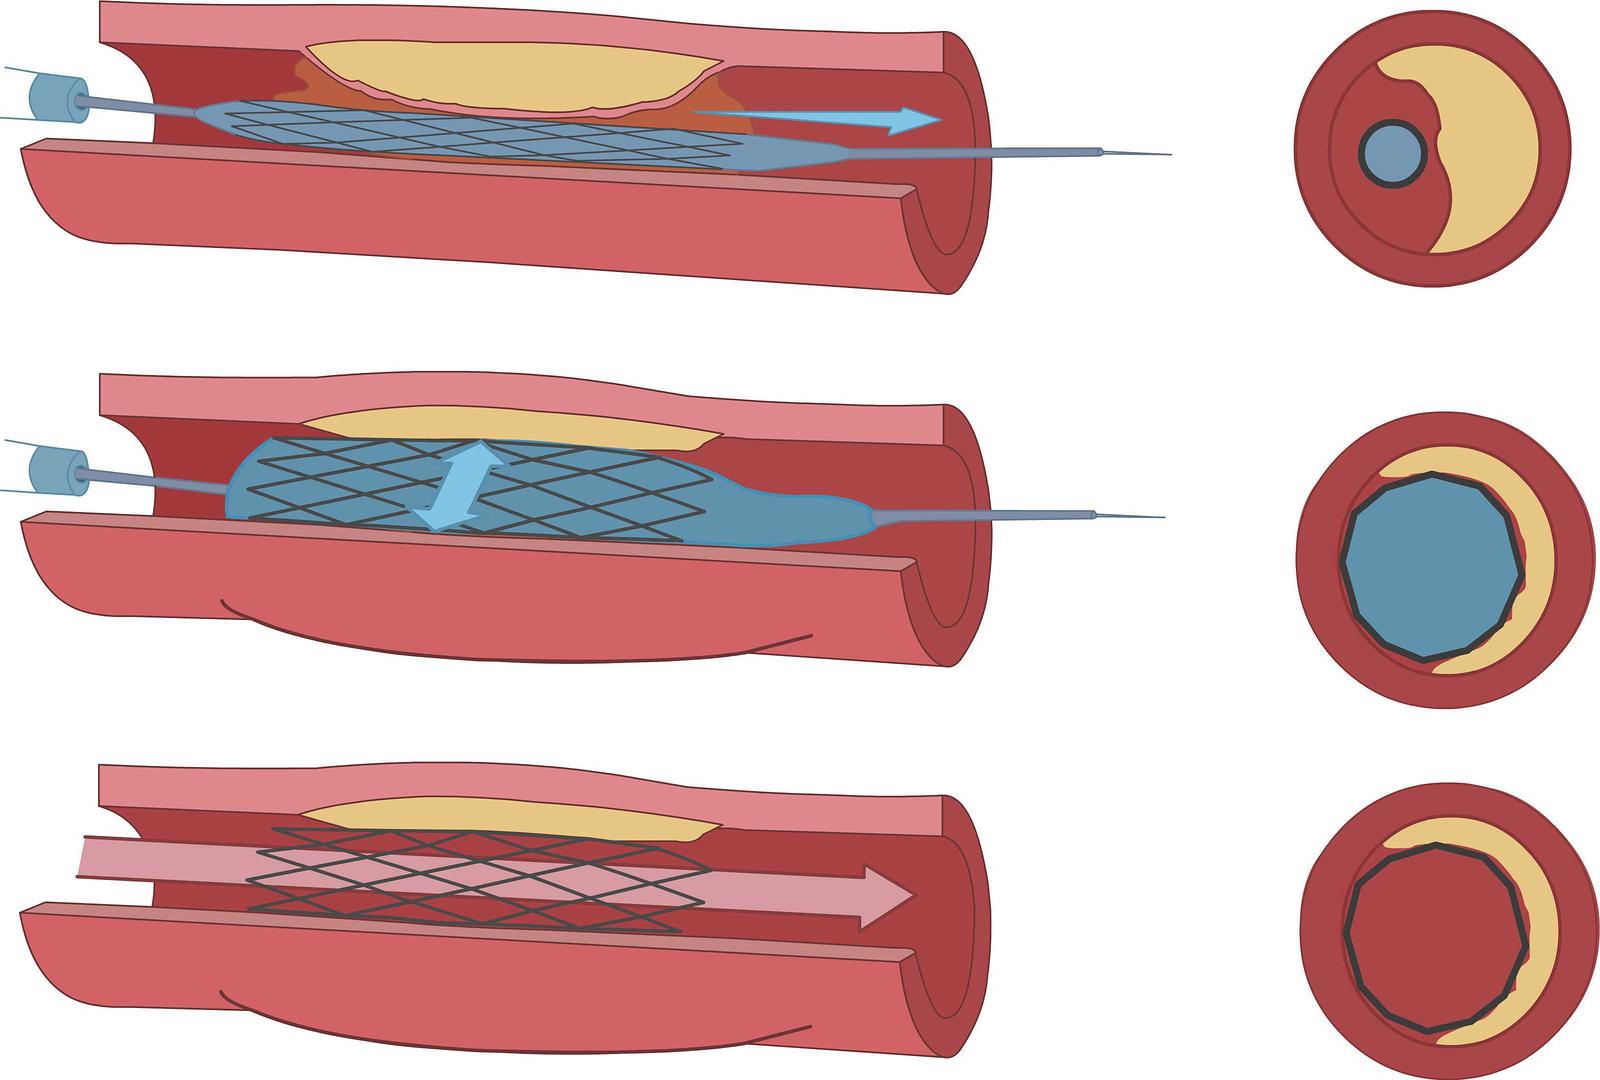 Endovascular Angioplasty and Stent Example Image - Tulsa Cardiovascular 